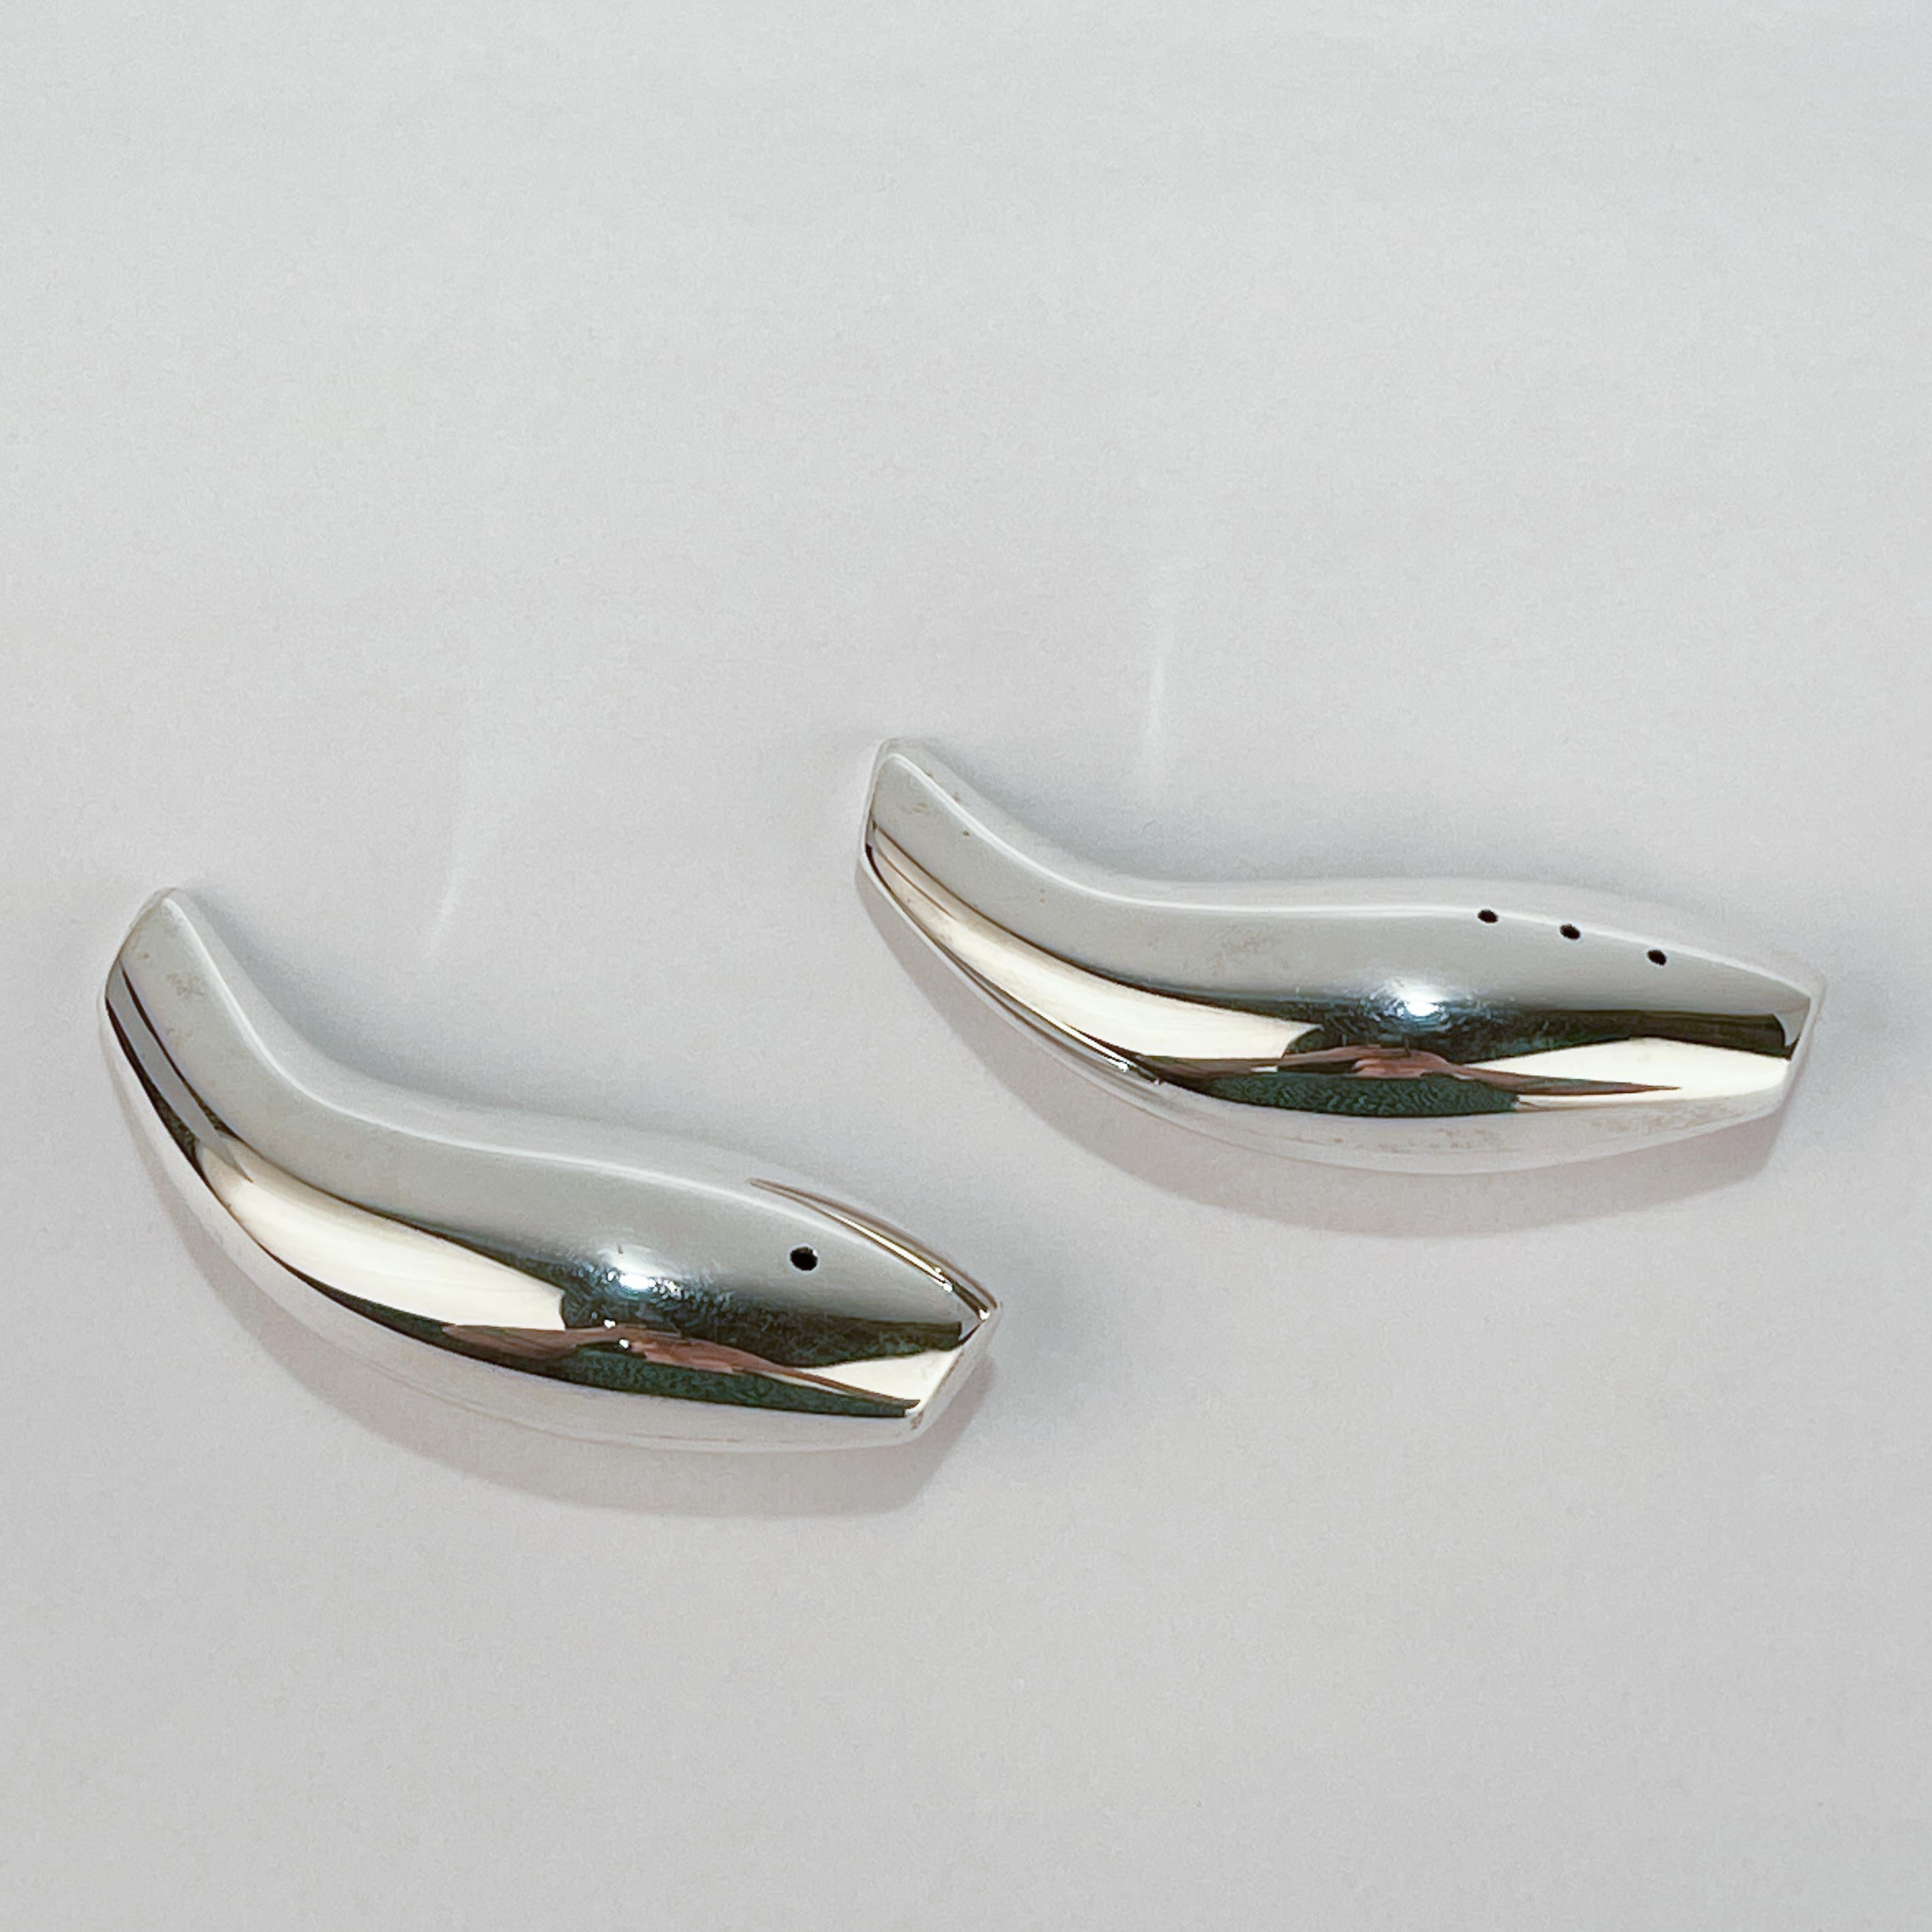 A fine pair of Tiffany & Co. 'Fish' salt and pepper shakers.

Designed by Frank Gehry.

In sterling silver with curved bodies and openings to the tops. 

Simply amazing design!

Date:
21st century

Overall Condition:
They are in overall good,